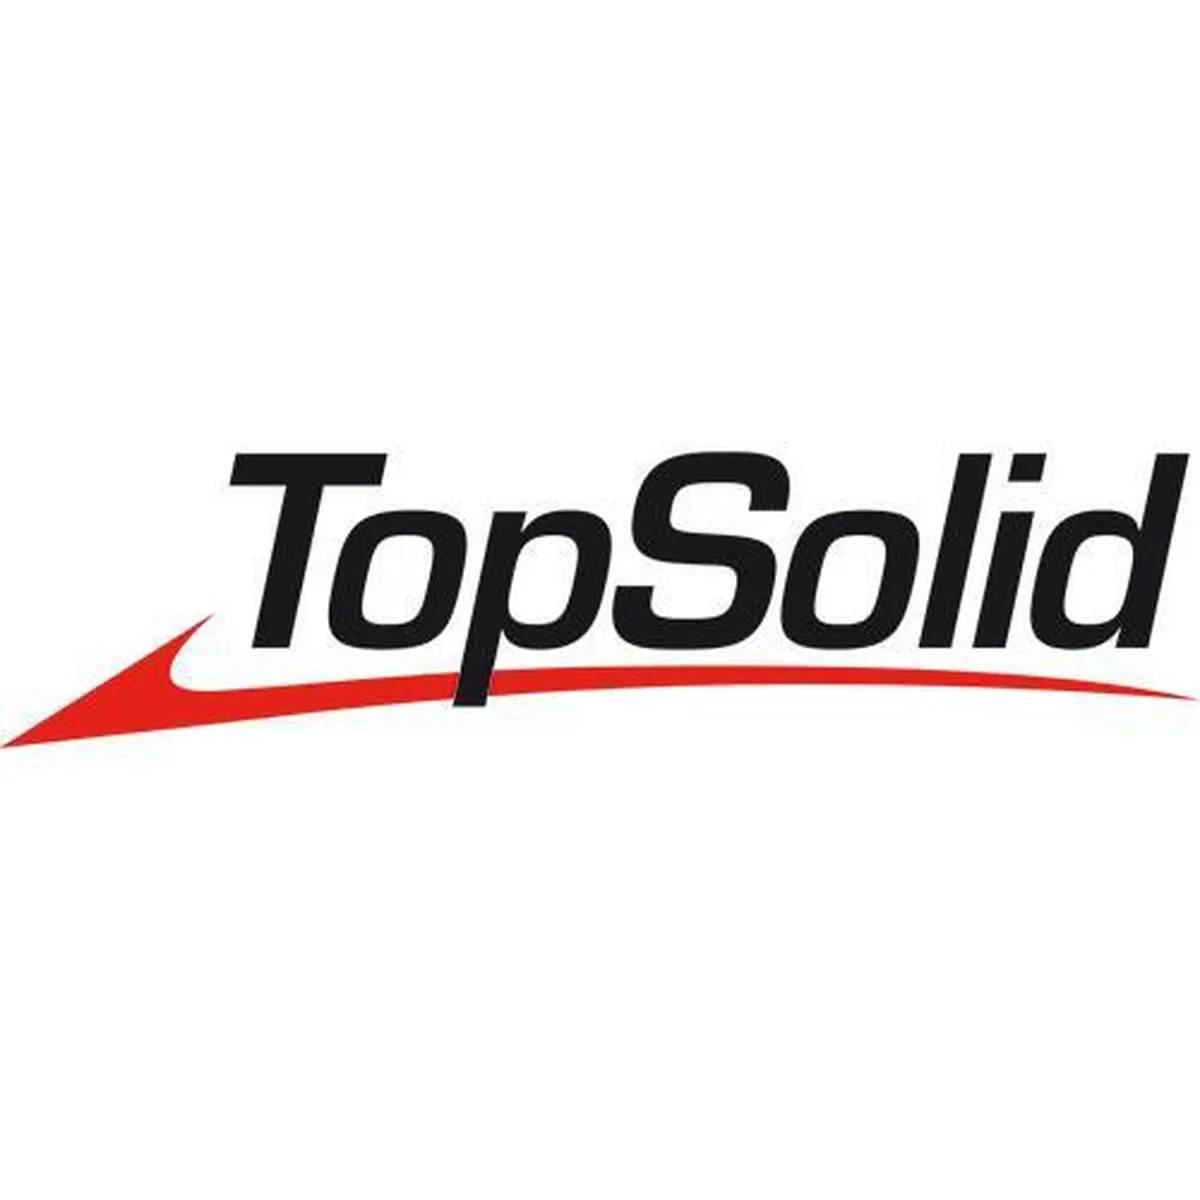 TopSolid Design Review